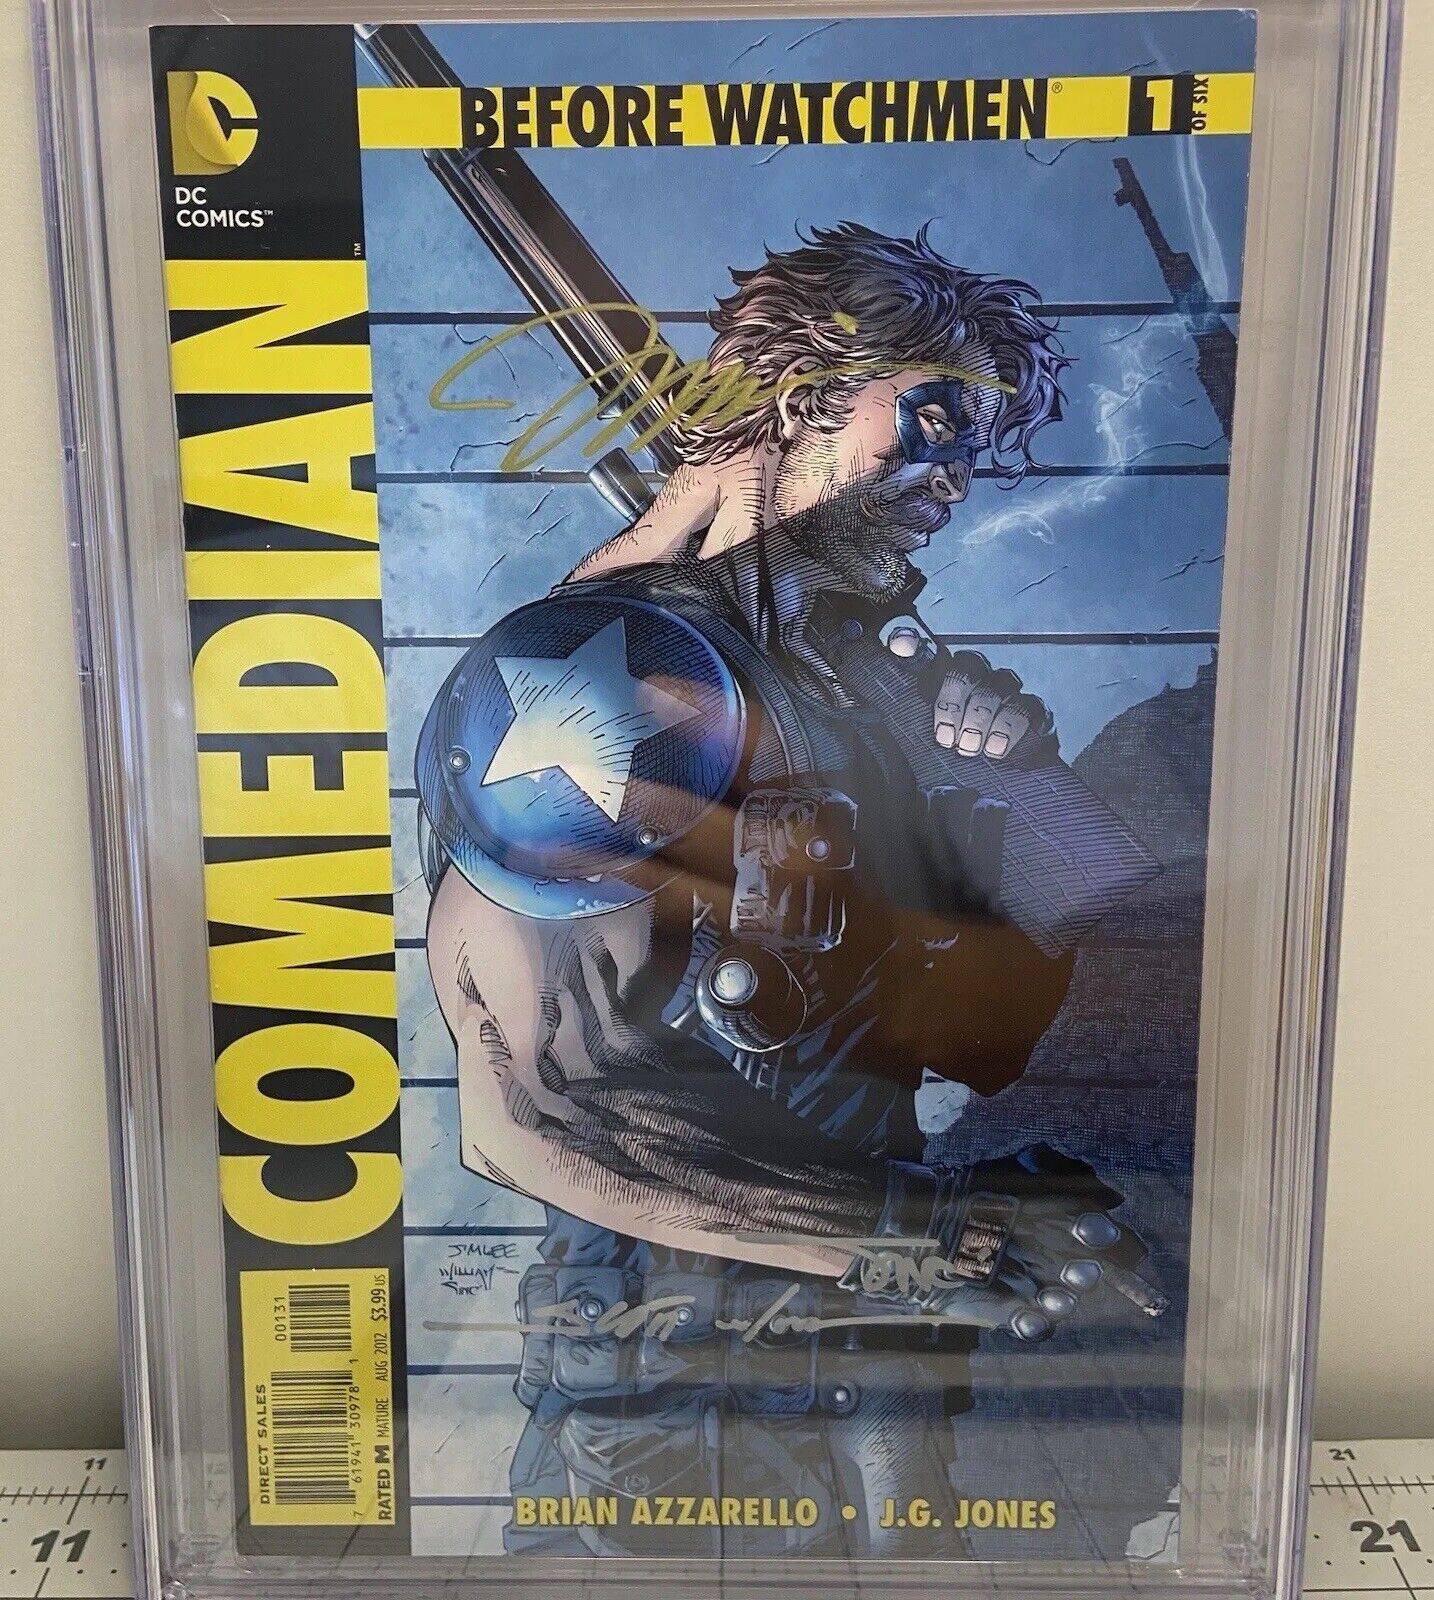 BEFORE WATCHMEN: COMEDIAN #1 CGC SS 9.8 1:200 3X SIGNED LEE, SINCLAIR & WILLIAMS